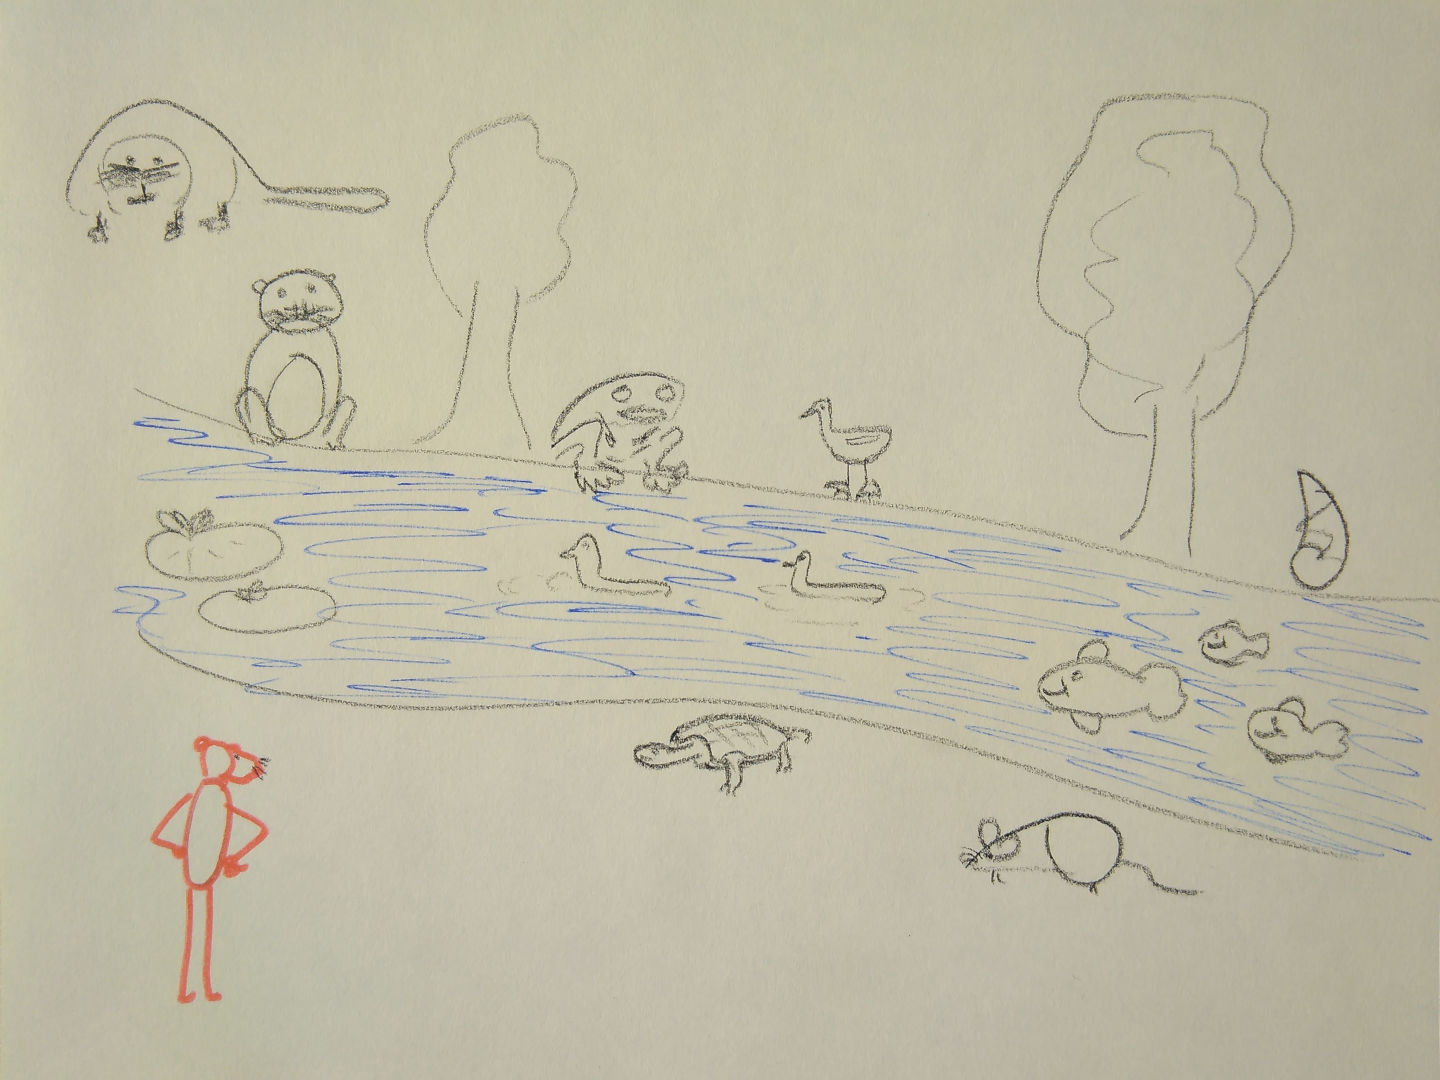 Then Panther arrives at a big river. Panther  thinks: "This river looks interesting. I will follow it to see where it comes from." There are flowers that grow on the water: water lilies! And many animals live in the river: ducks, geese, fish, and even a turtle! 